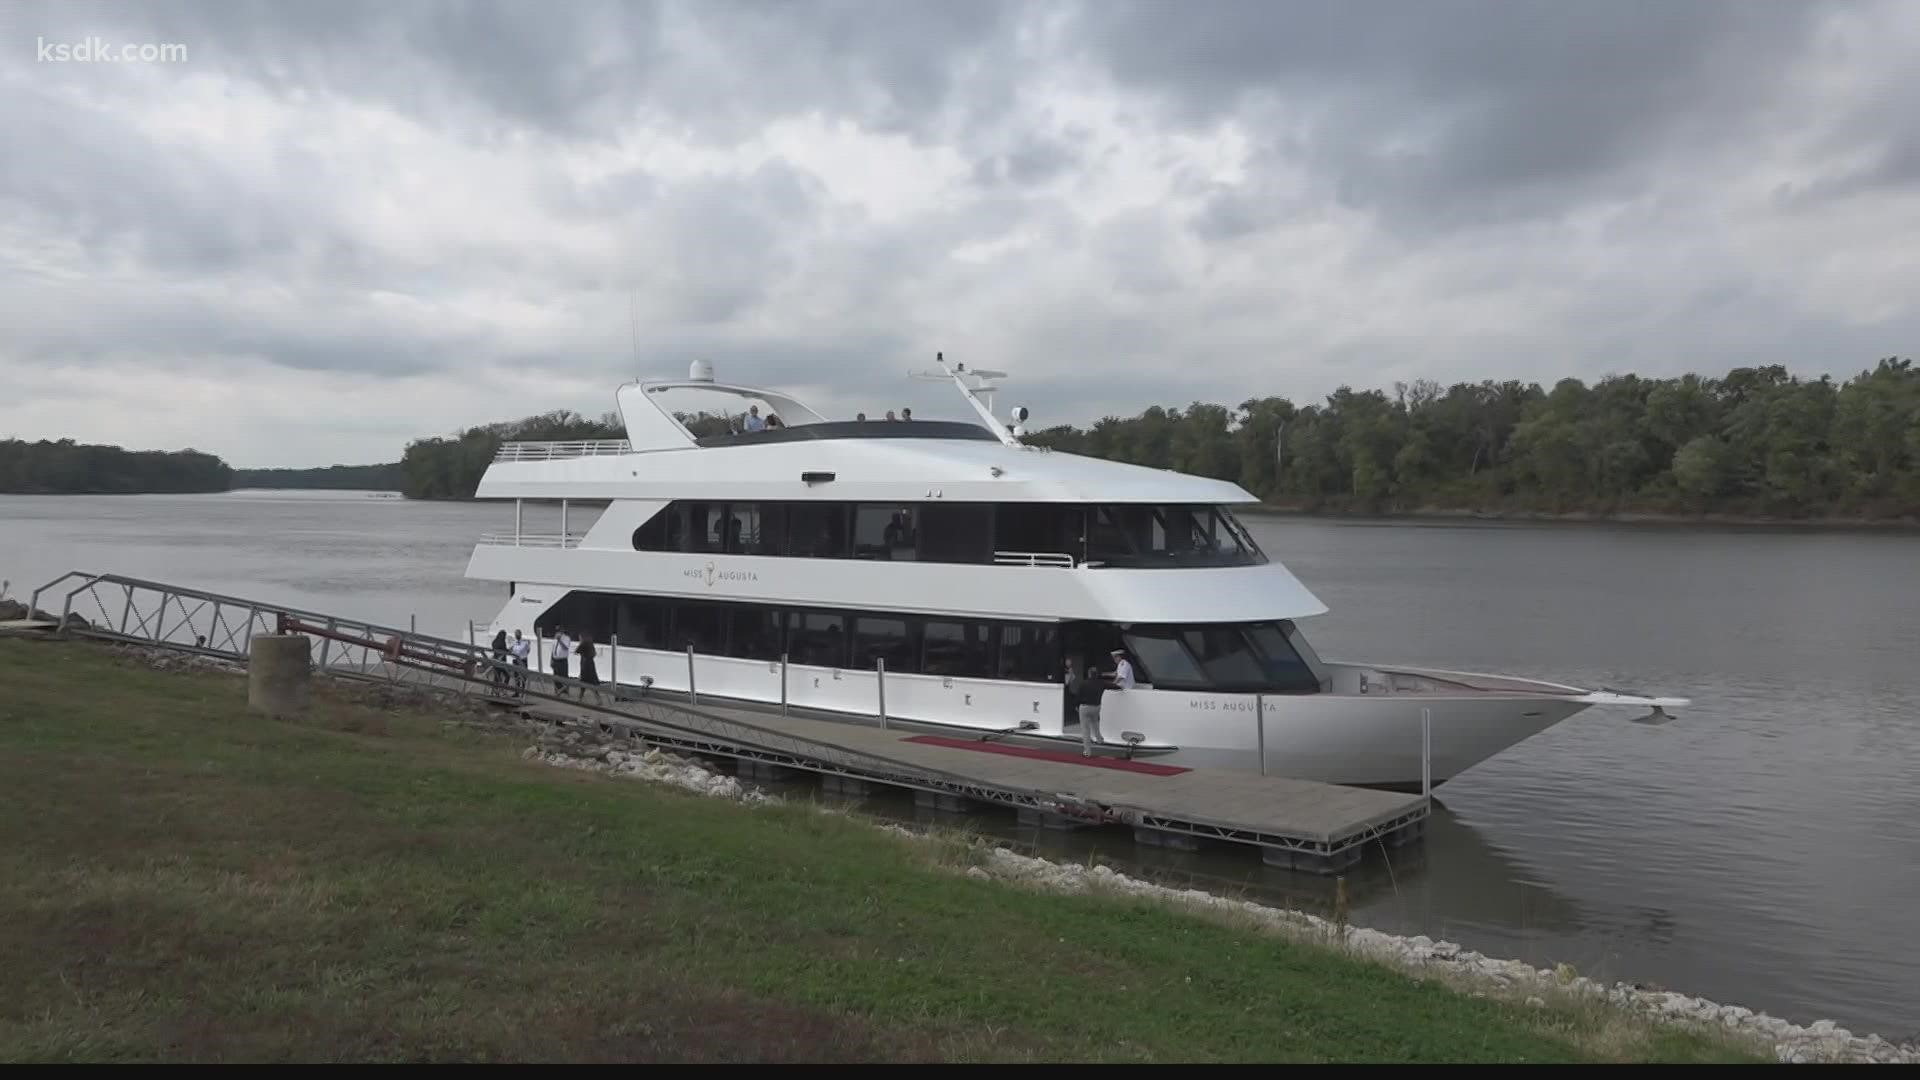 They christened a luxury yacht with a familiar name, Sunday.